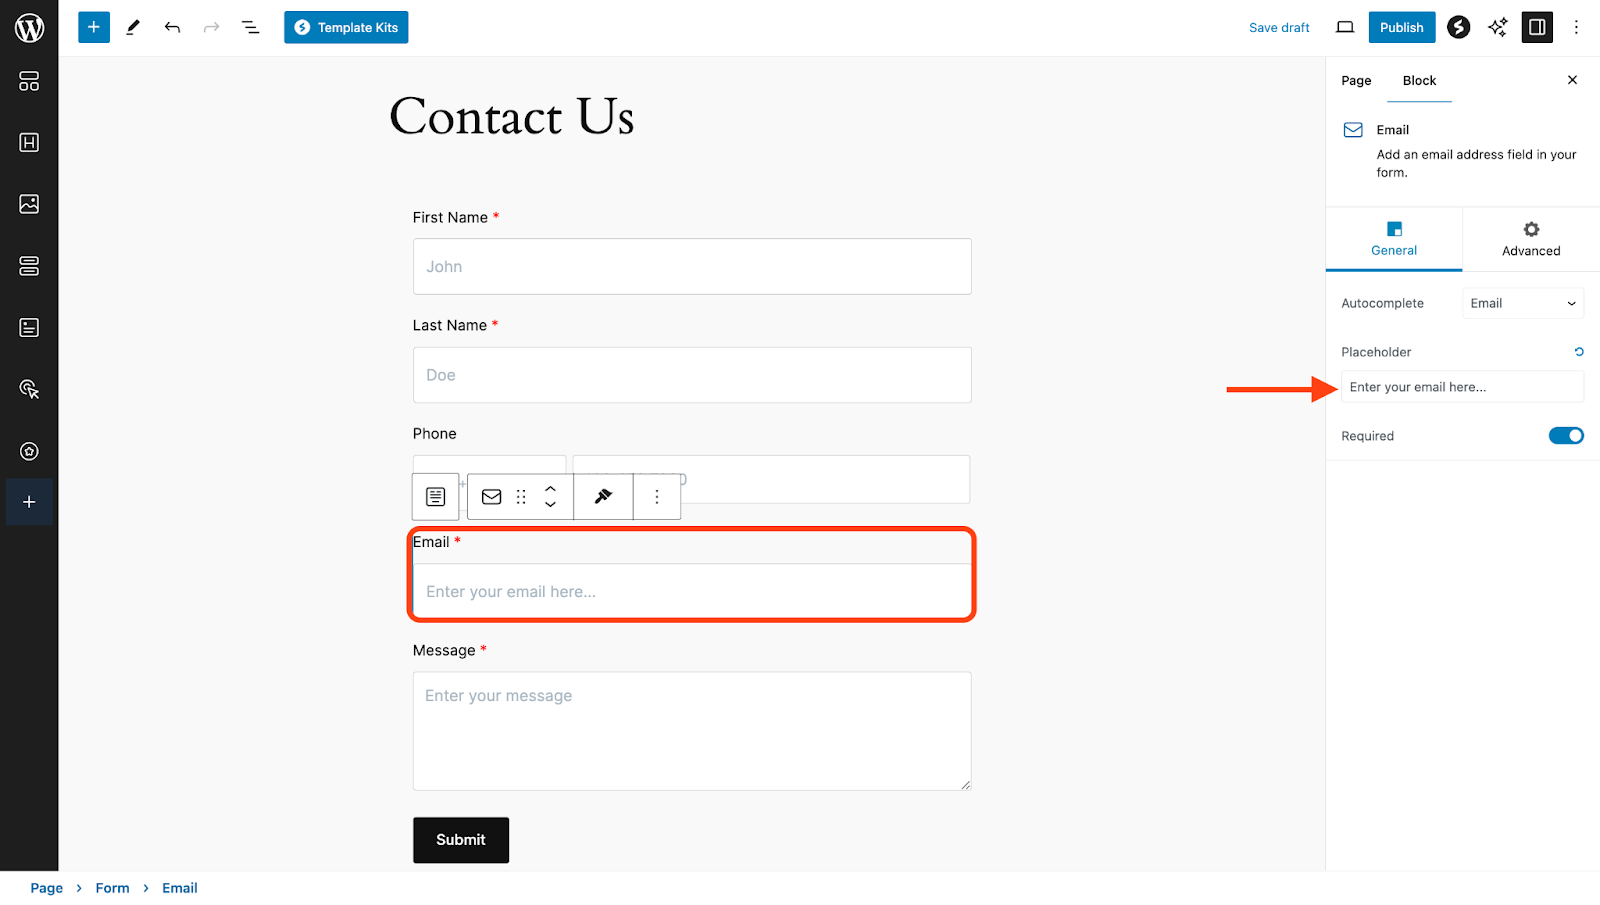 Select individual form field > General > Placeholder and add the placeholder text